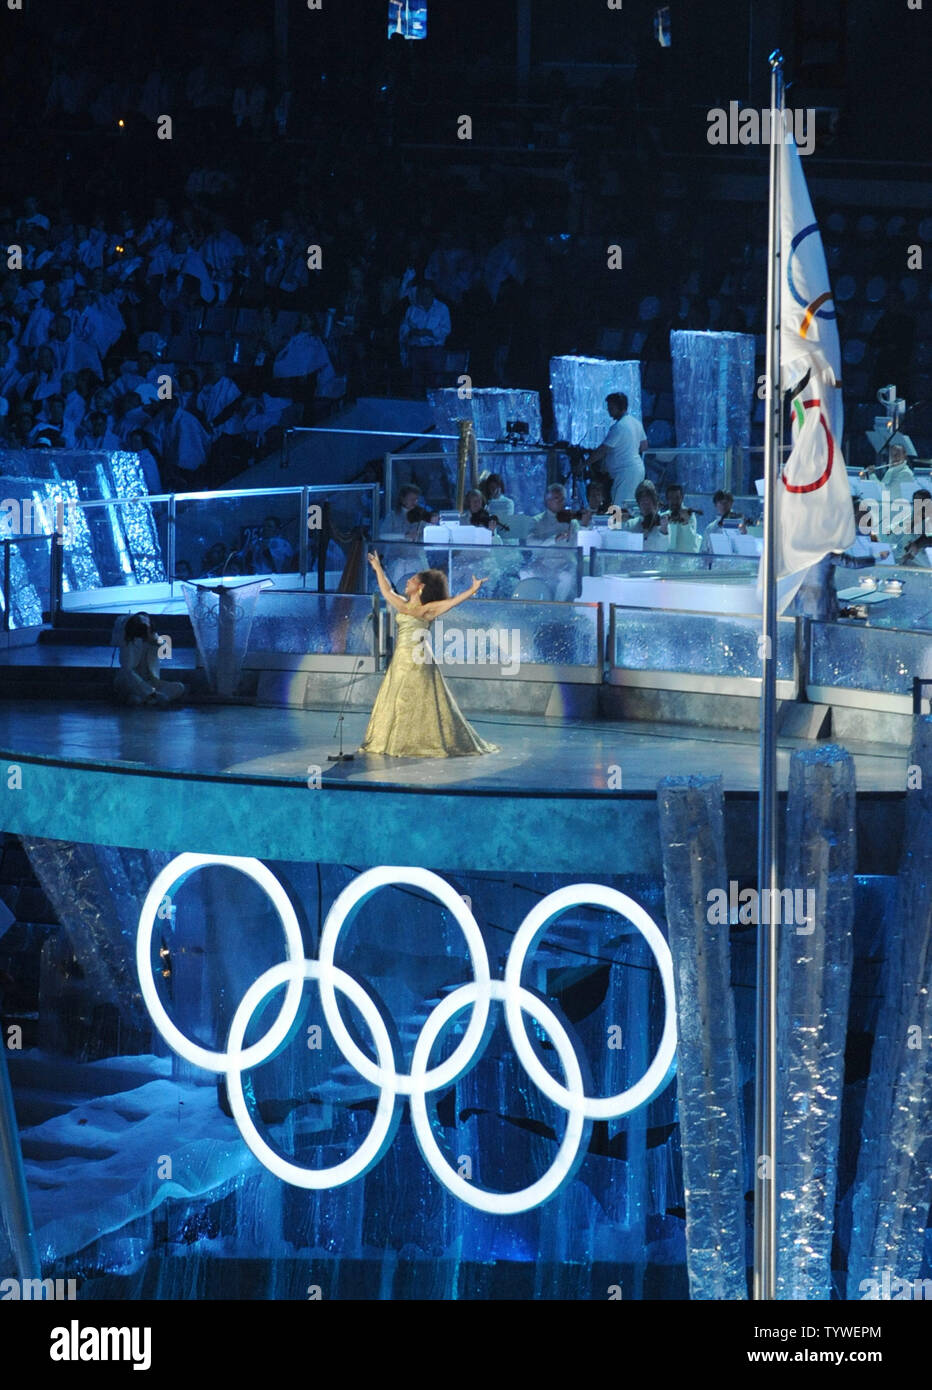 Photo: Opening Ceremonies held for 2010 Winter Olympics in Vancouver -  OLY2010021236 